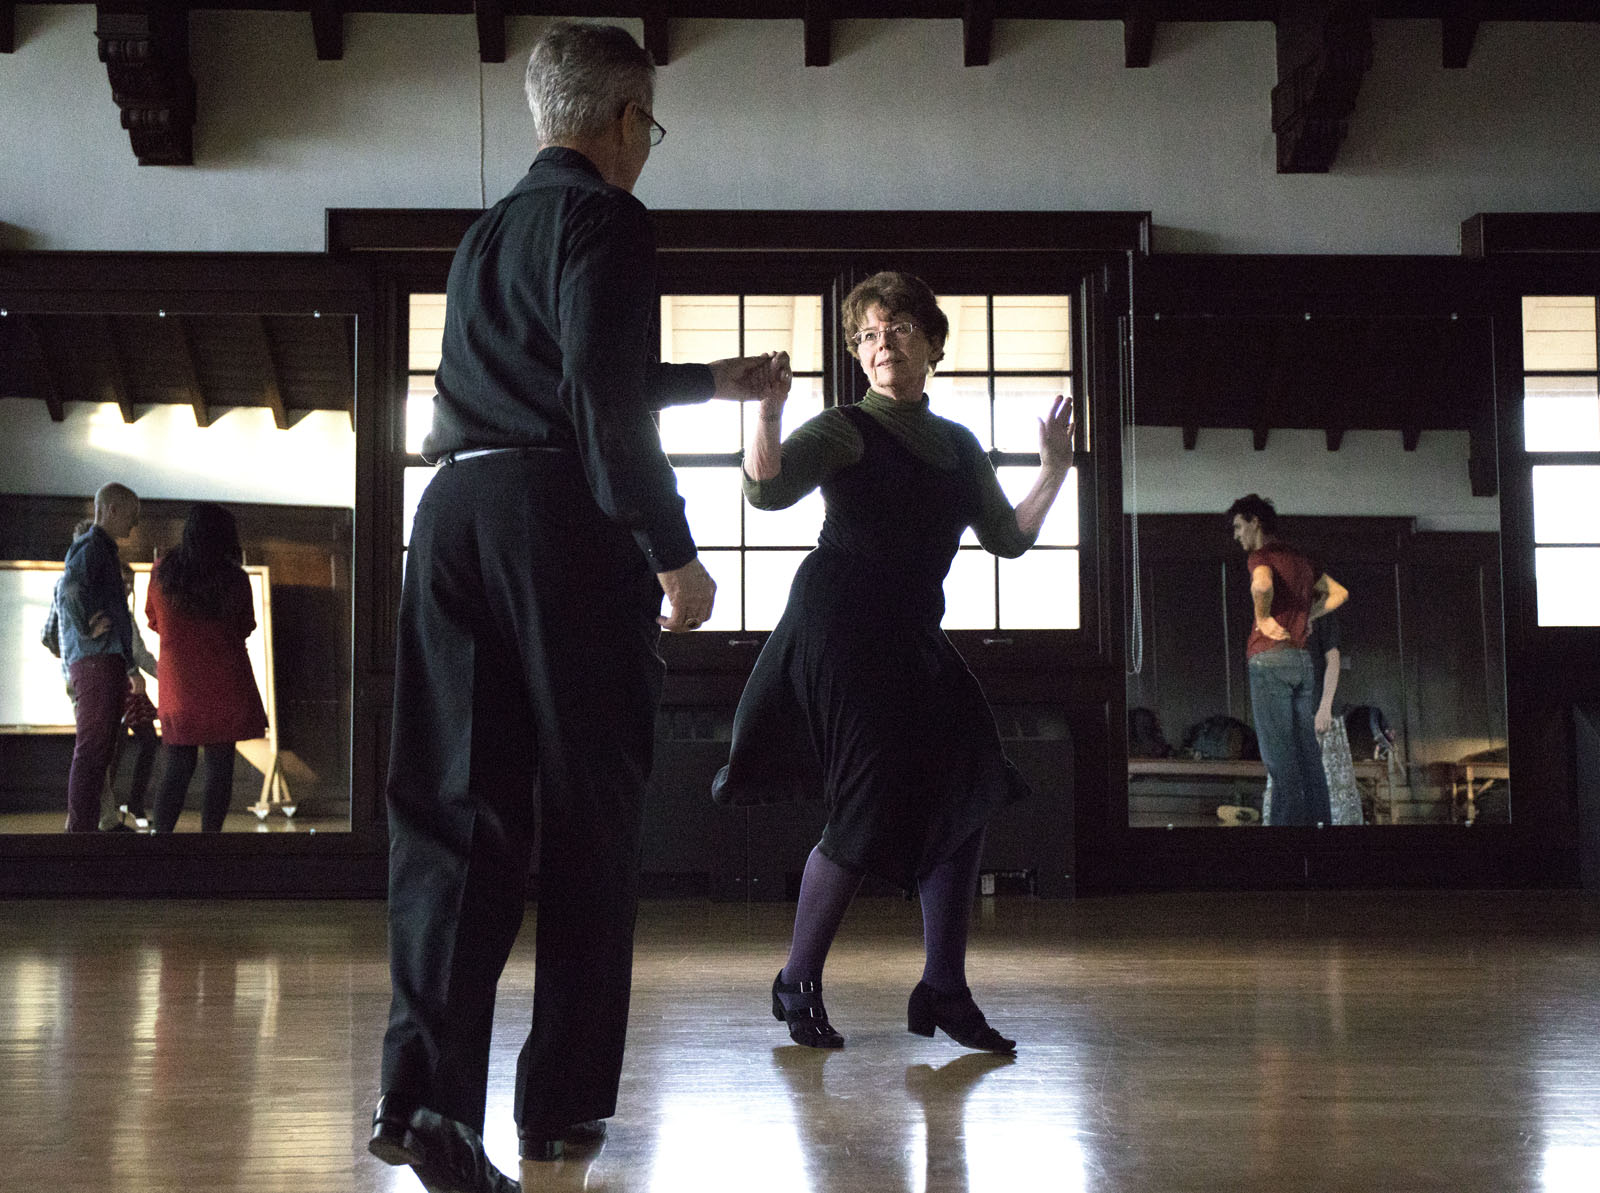 Marcia Dobson and John Riker teach a ballroom dancing class in Cossitt Hall that is open to students and staff alike. The class focuses on dance techniques for various dance styles.